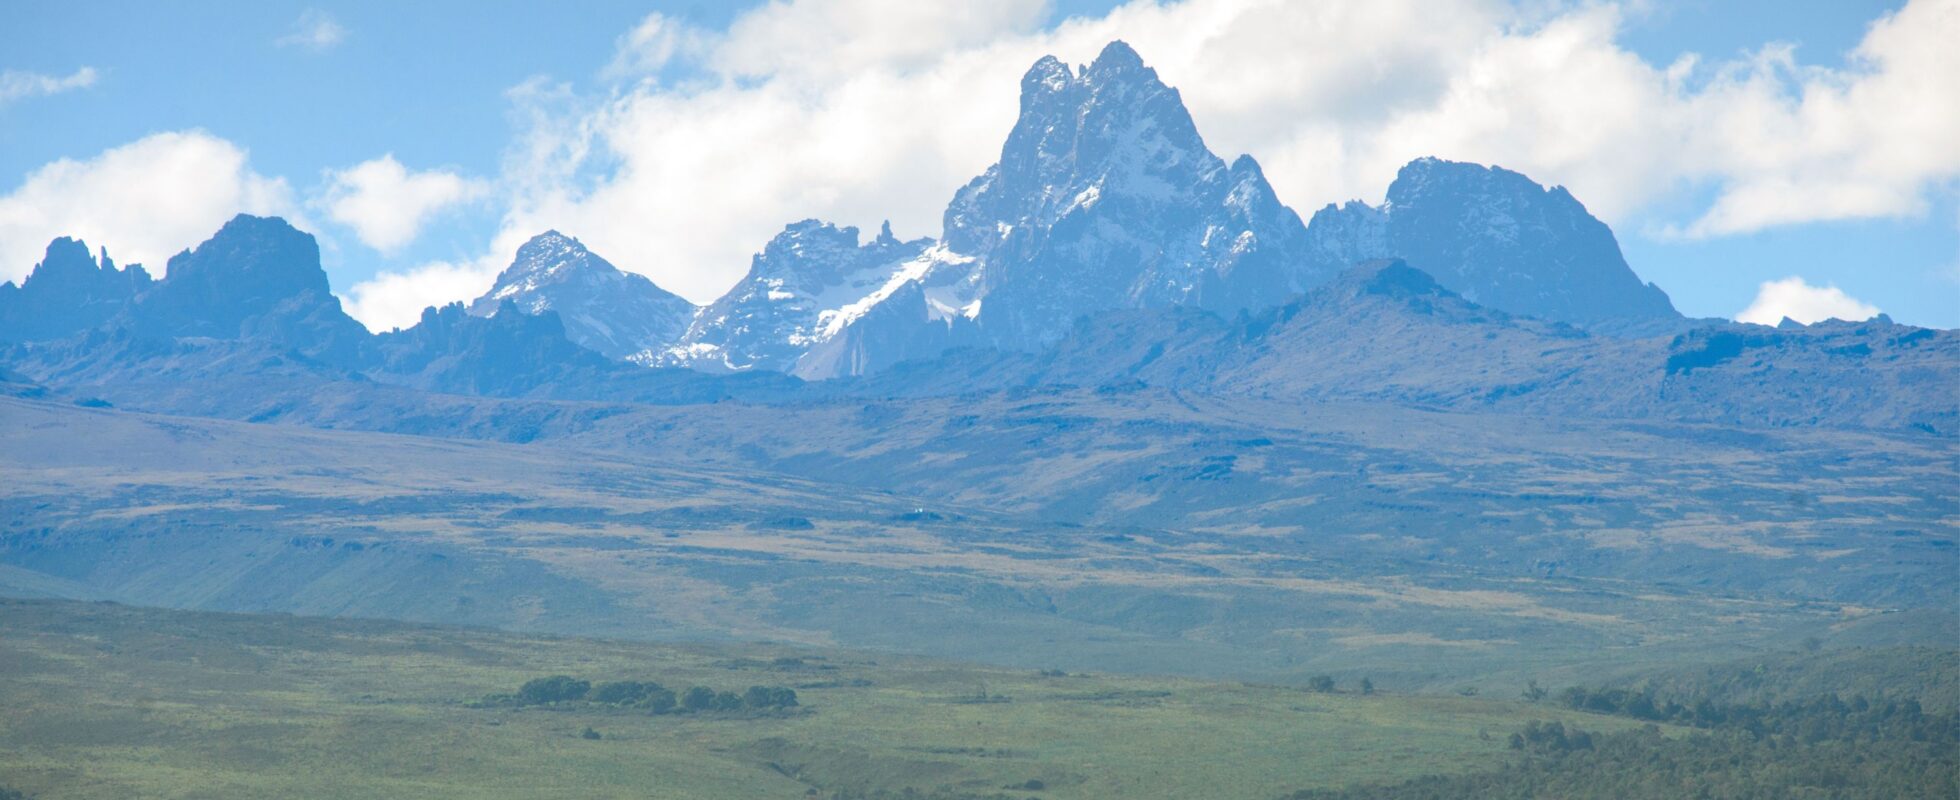 Mount Kenya from a distance with green landscape in front of it